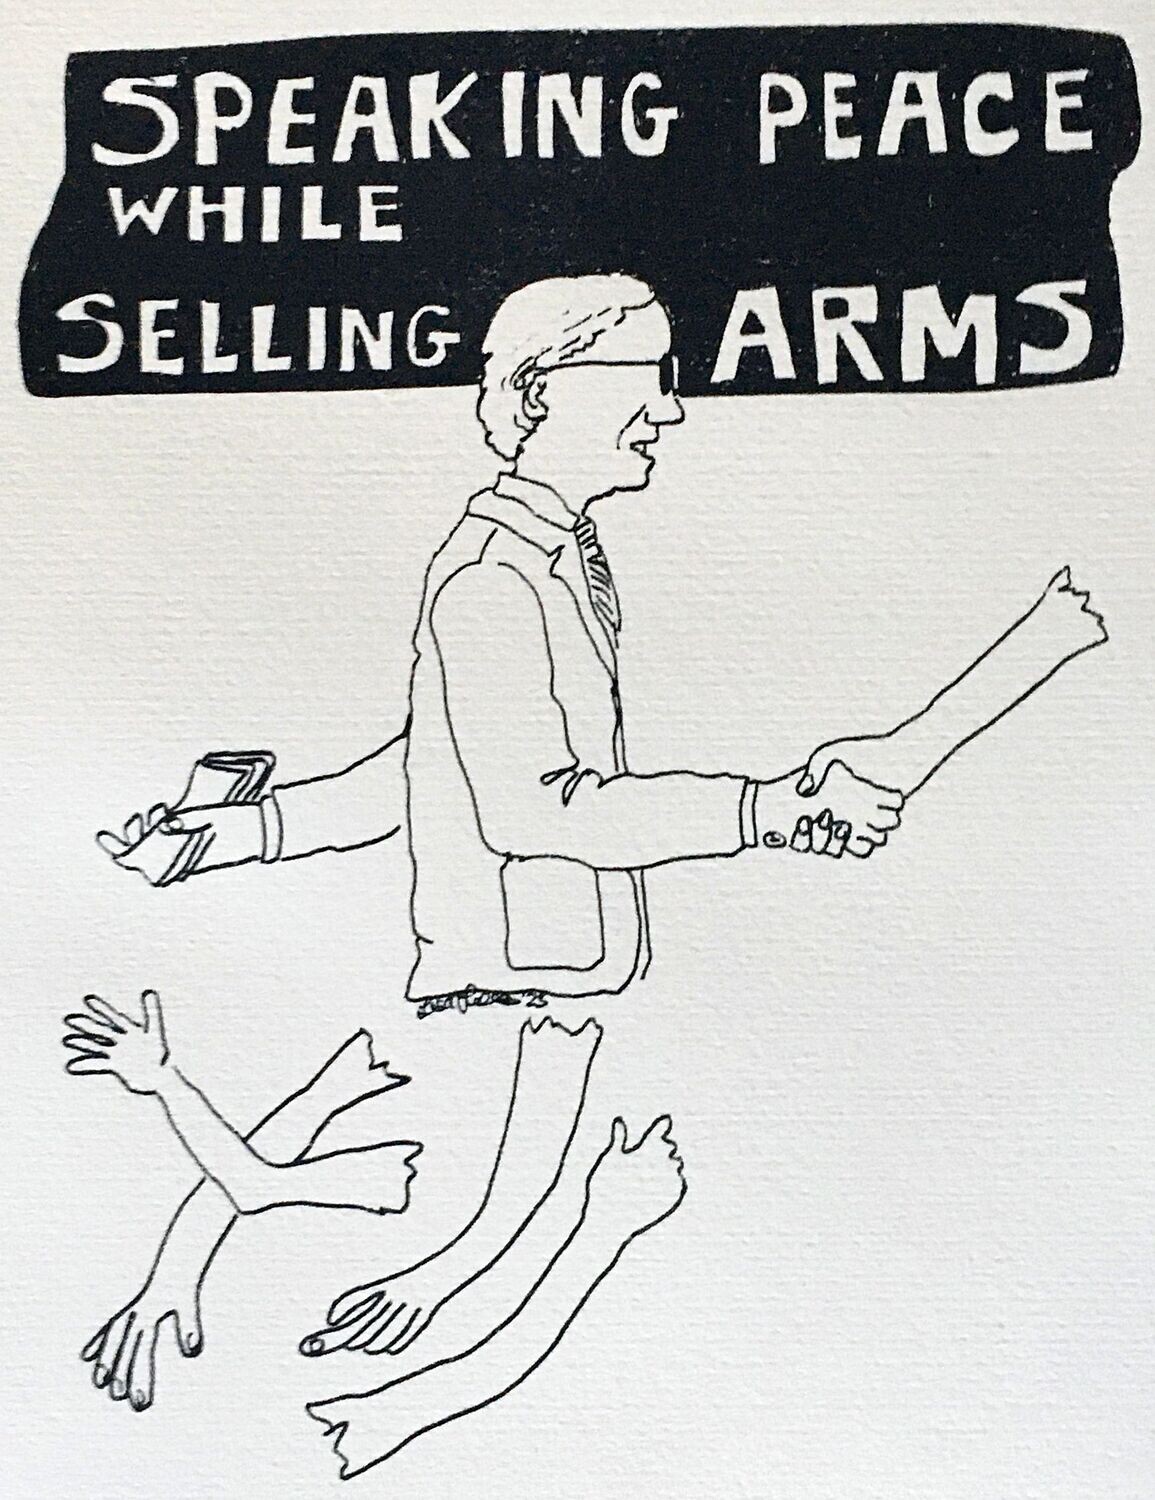 Lisa Fingleton, 'Speaking peace while selling arms', unframed